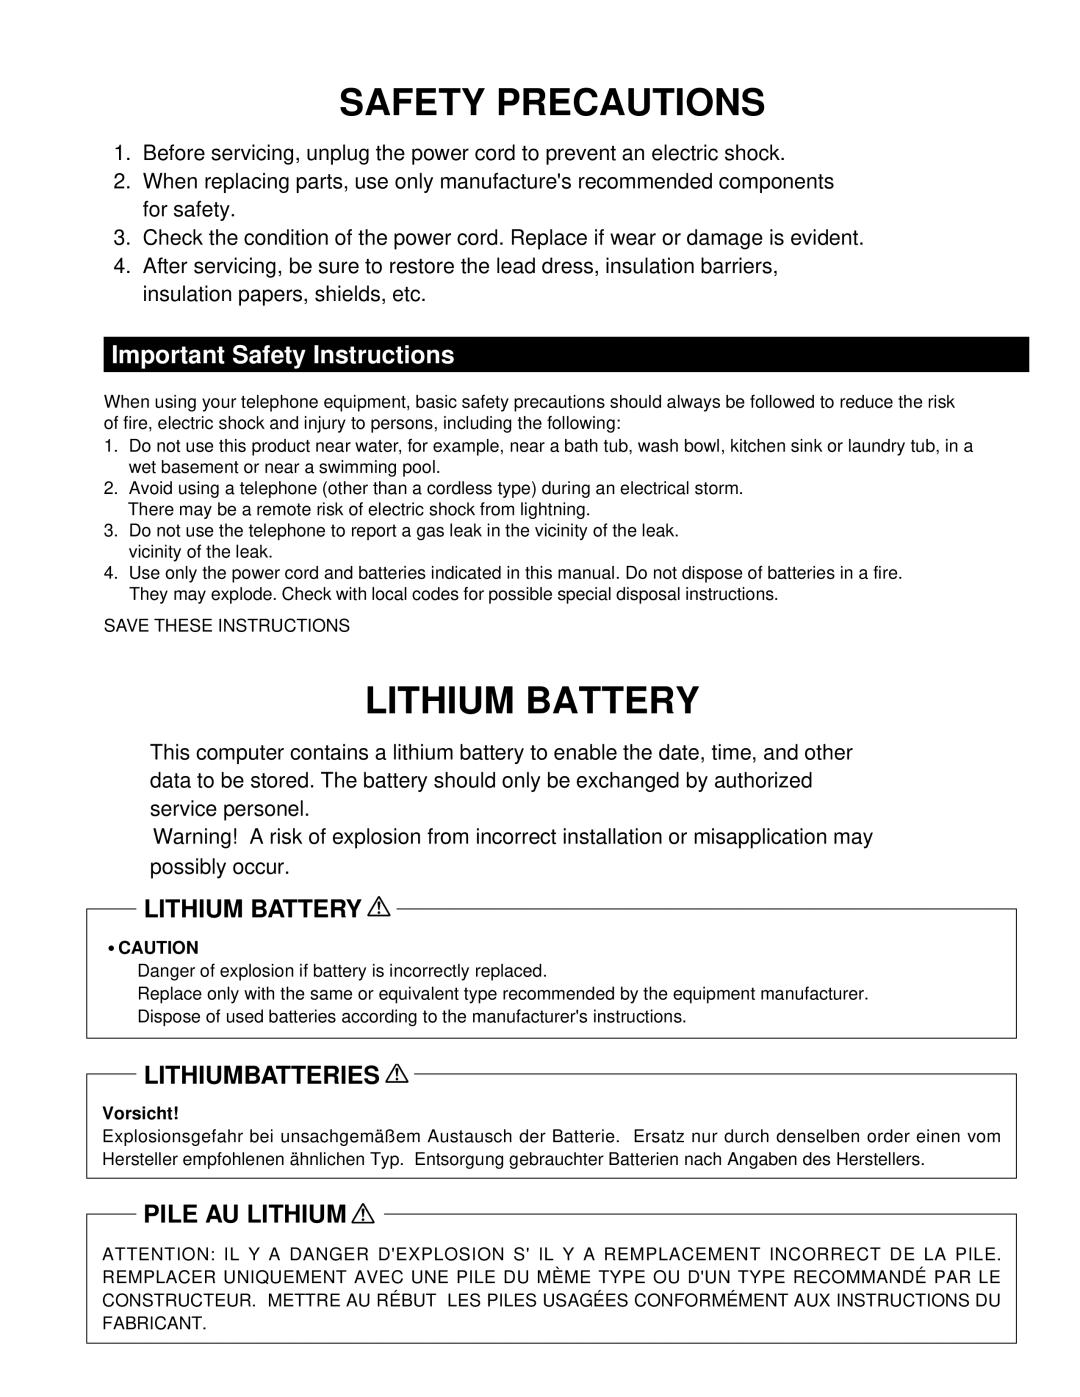 Philips CF-30FTSAZAM Important Safety Instructions, Safety Precautions, Lithium Battery, Lithiumbatteries, Pile Au Lithium 